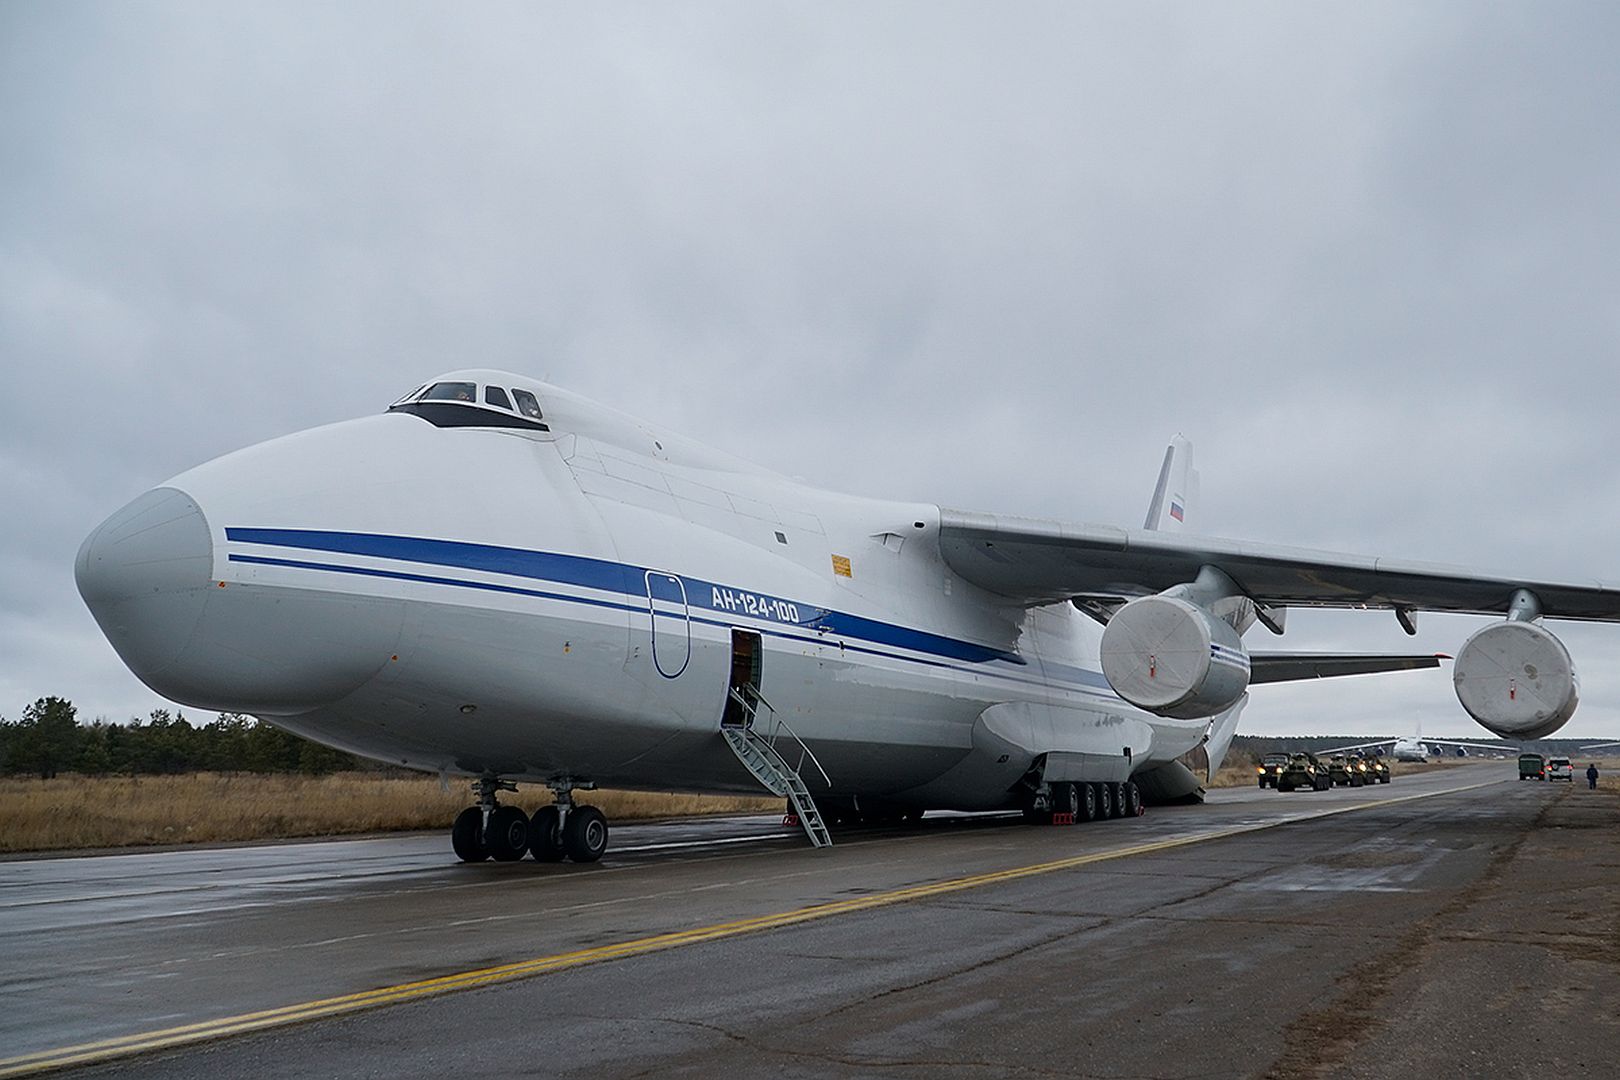 An 124 Aircraft Of The Military Transport Aviation Of The Aerospace Forces Of Russia